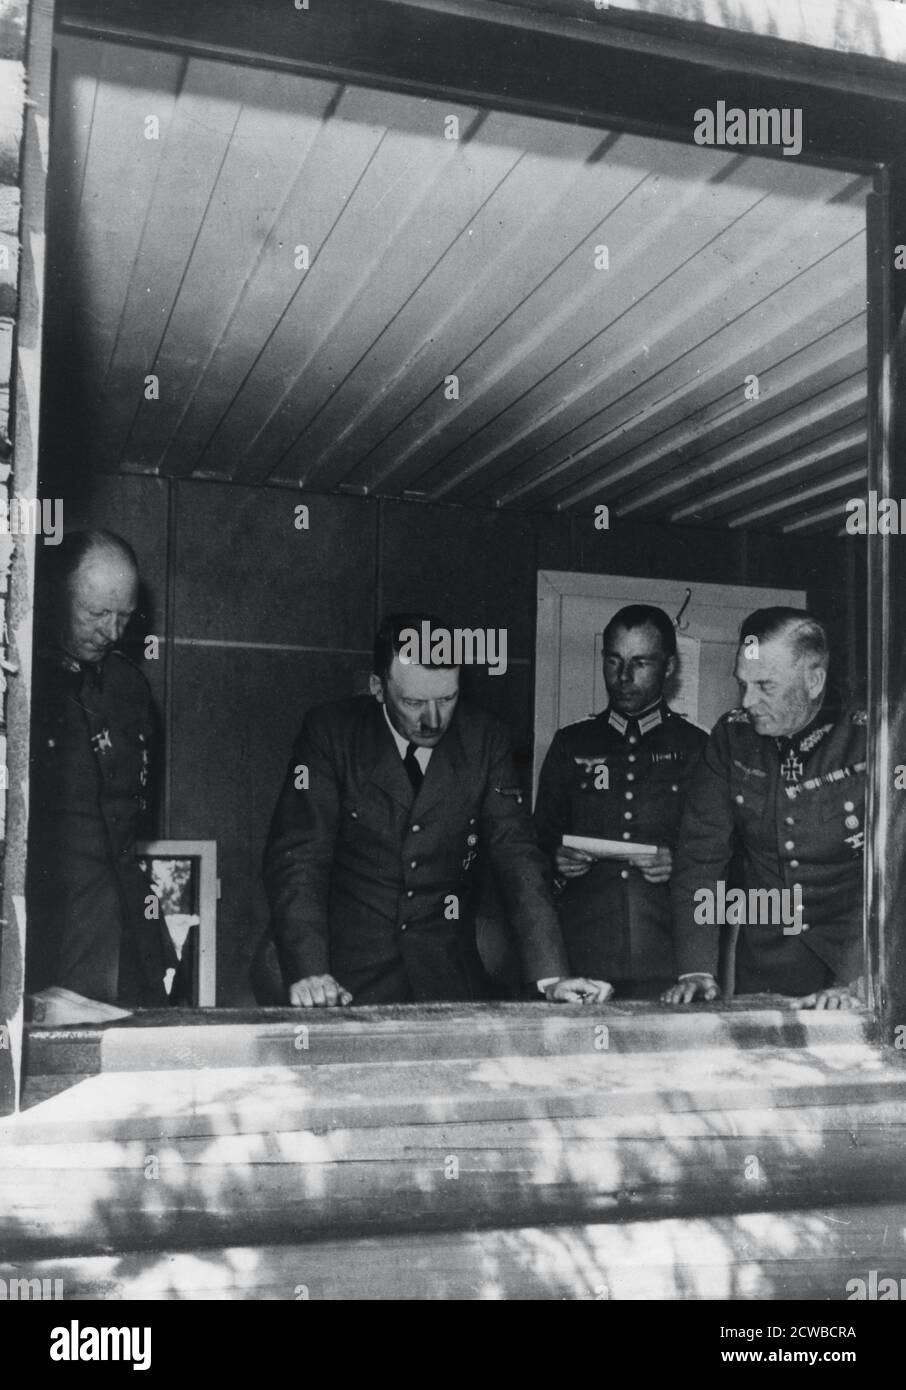 Adolf Hitler during the invasion of France, World War II, 1940. Hitler is shown studying maps at his headquarters flanked by General Alfred Jodl, Chief of Operations Staff, Major Deile and General Wilhelm Keitel. The photographer is unknown. Stock Photo